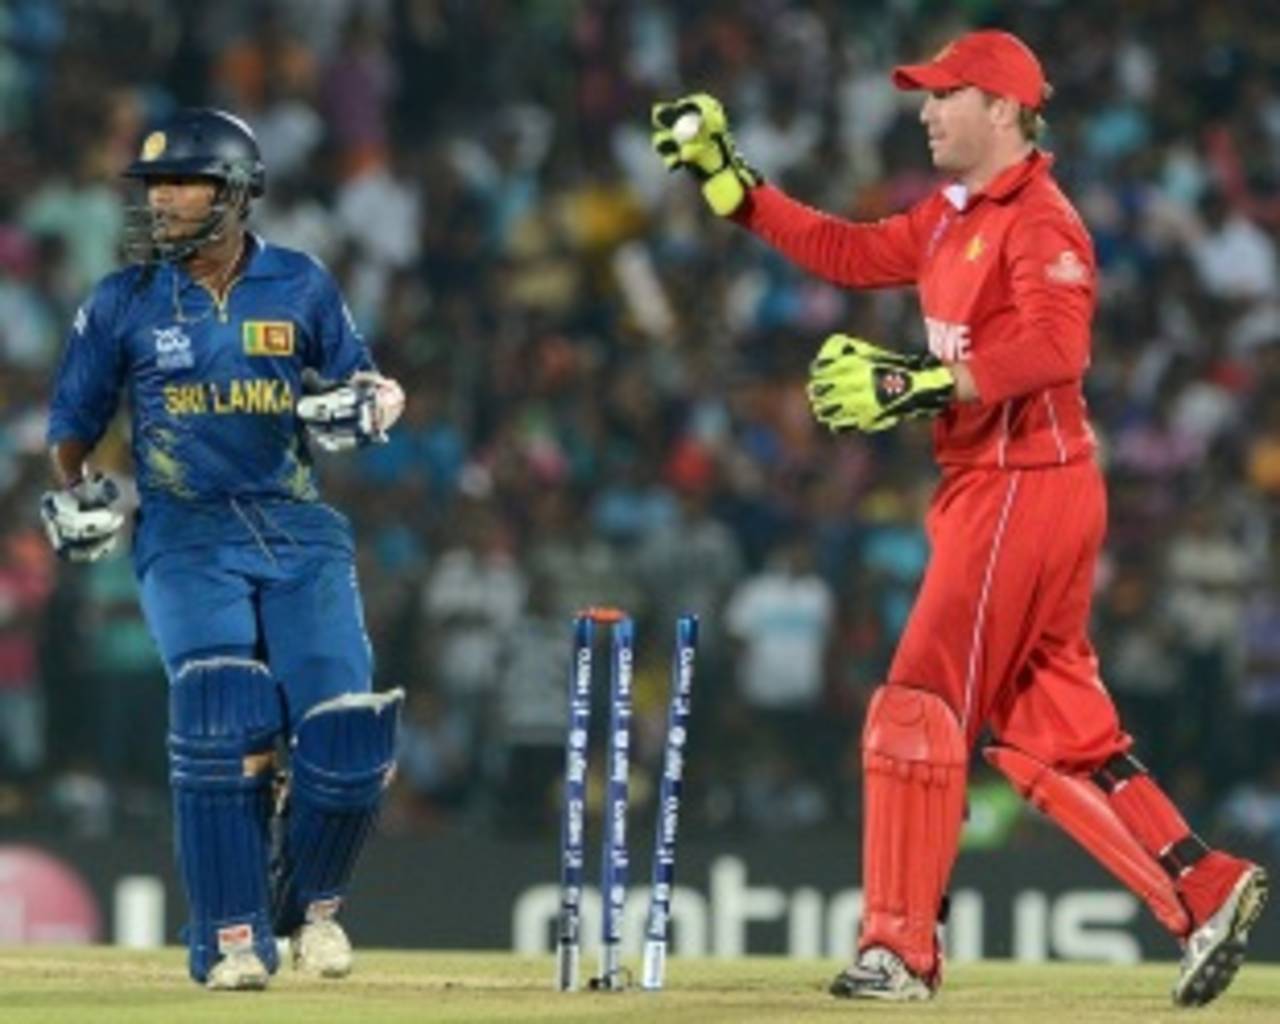 Dilshan Munaweera was run out after he lost his bat mid pitch&nbsp;&nbsp;&bull;&nbsp;&nbsp;AFP